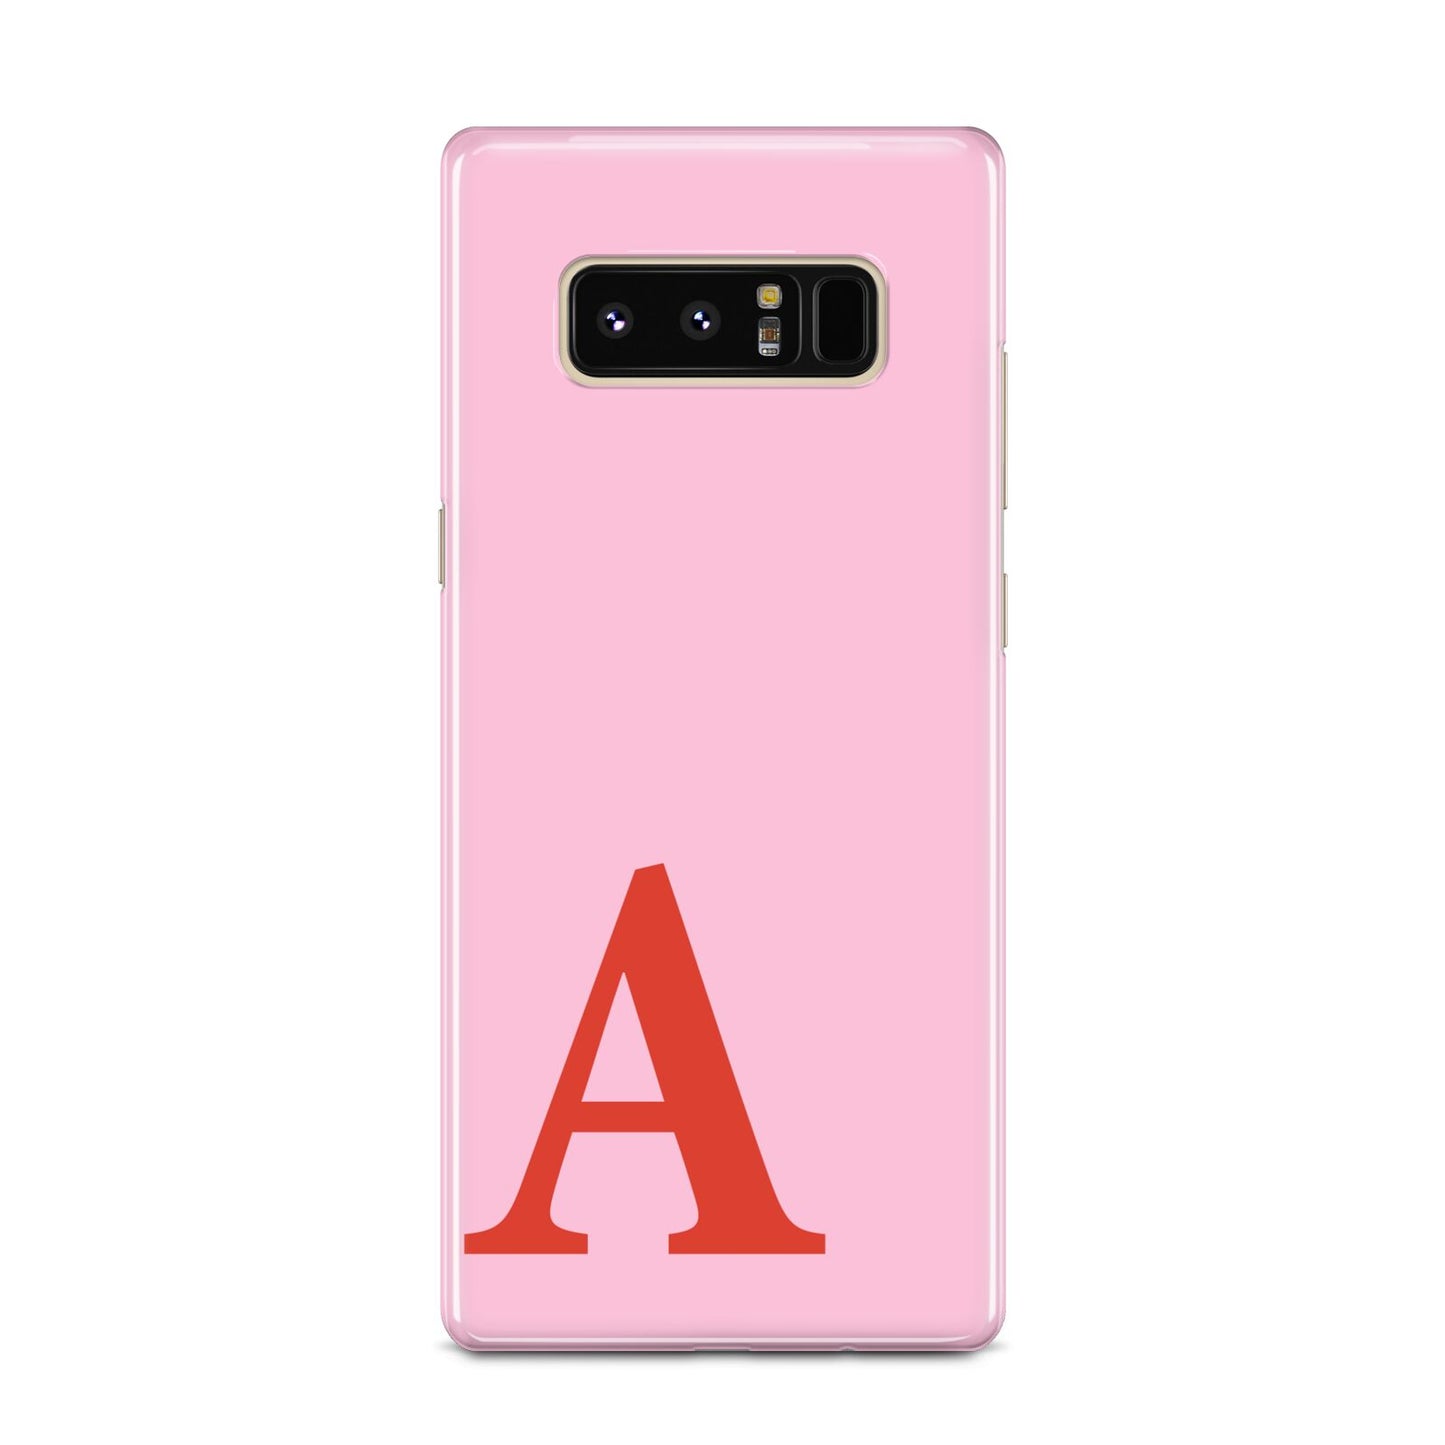 Personalised Pink and Red Samsung Galaxy Note 8 Case